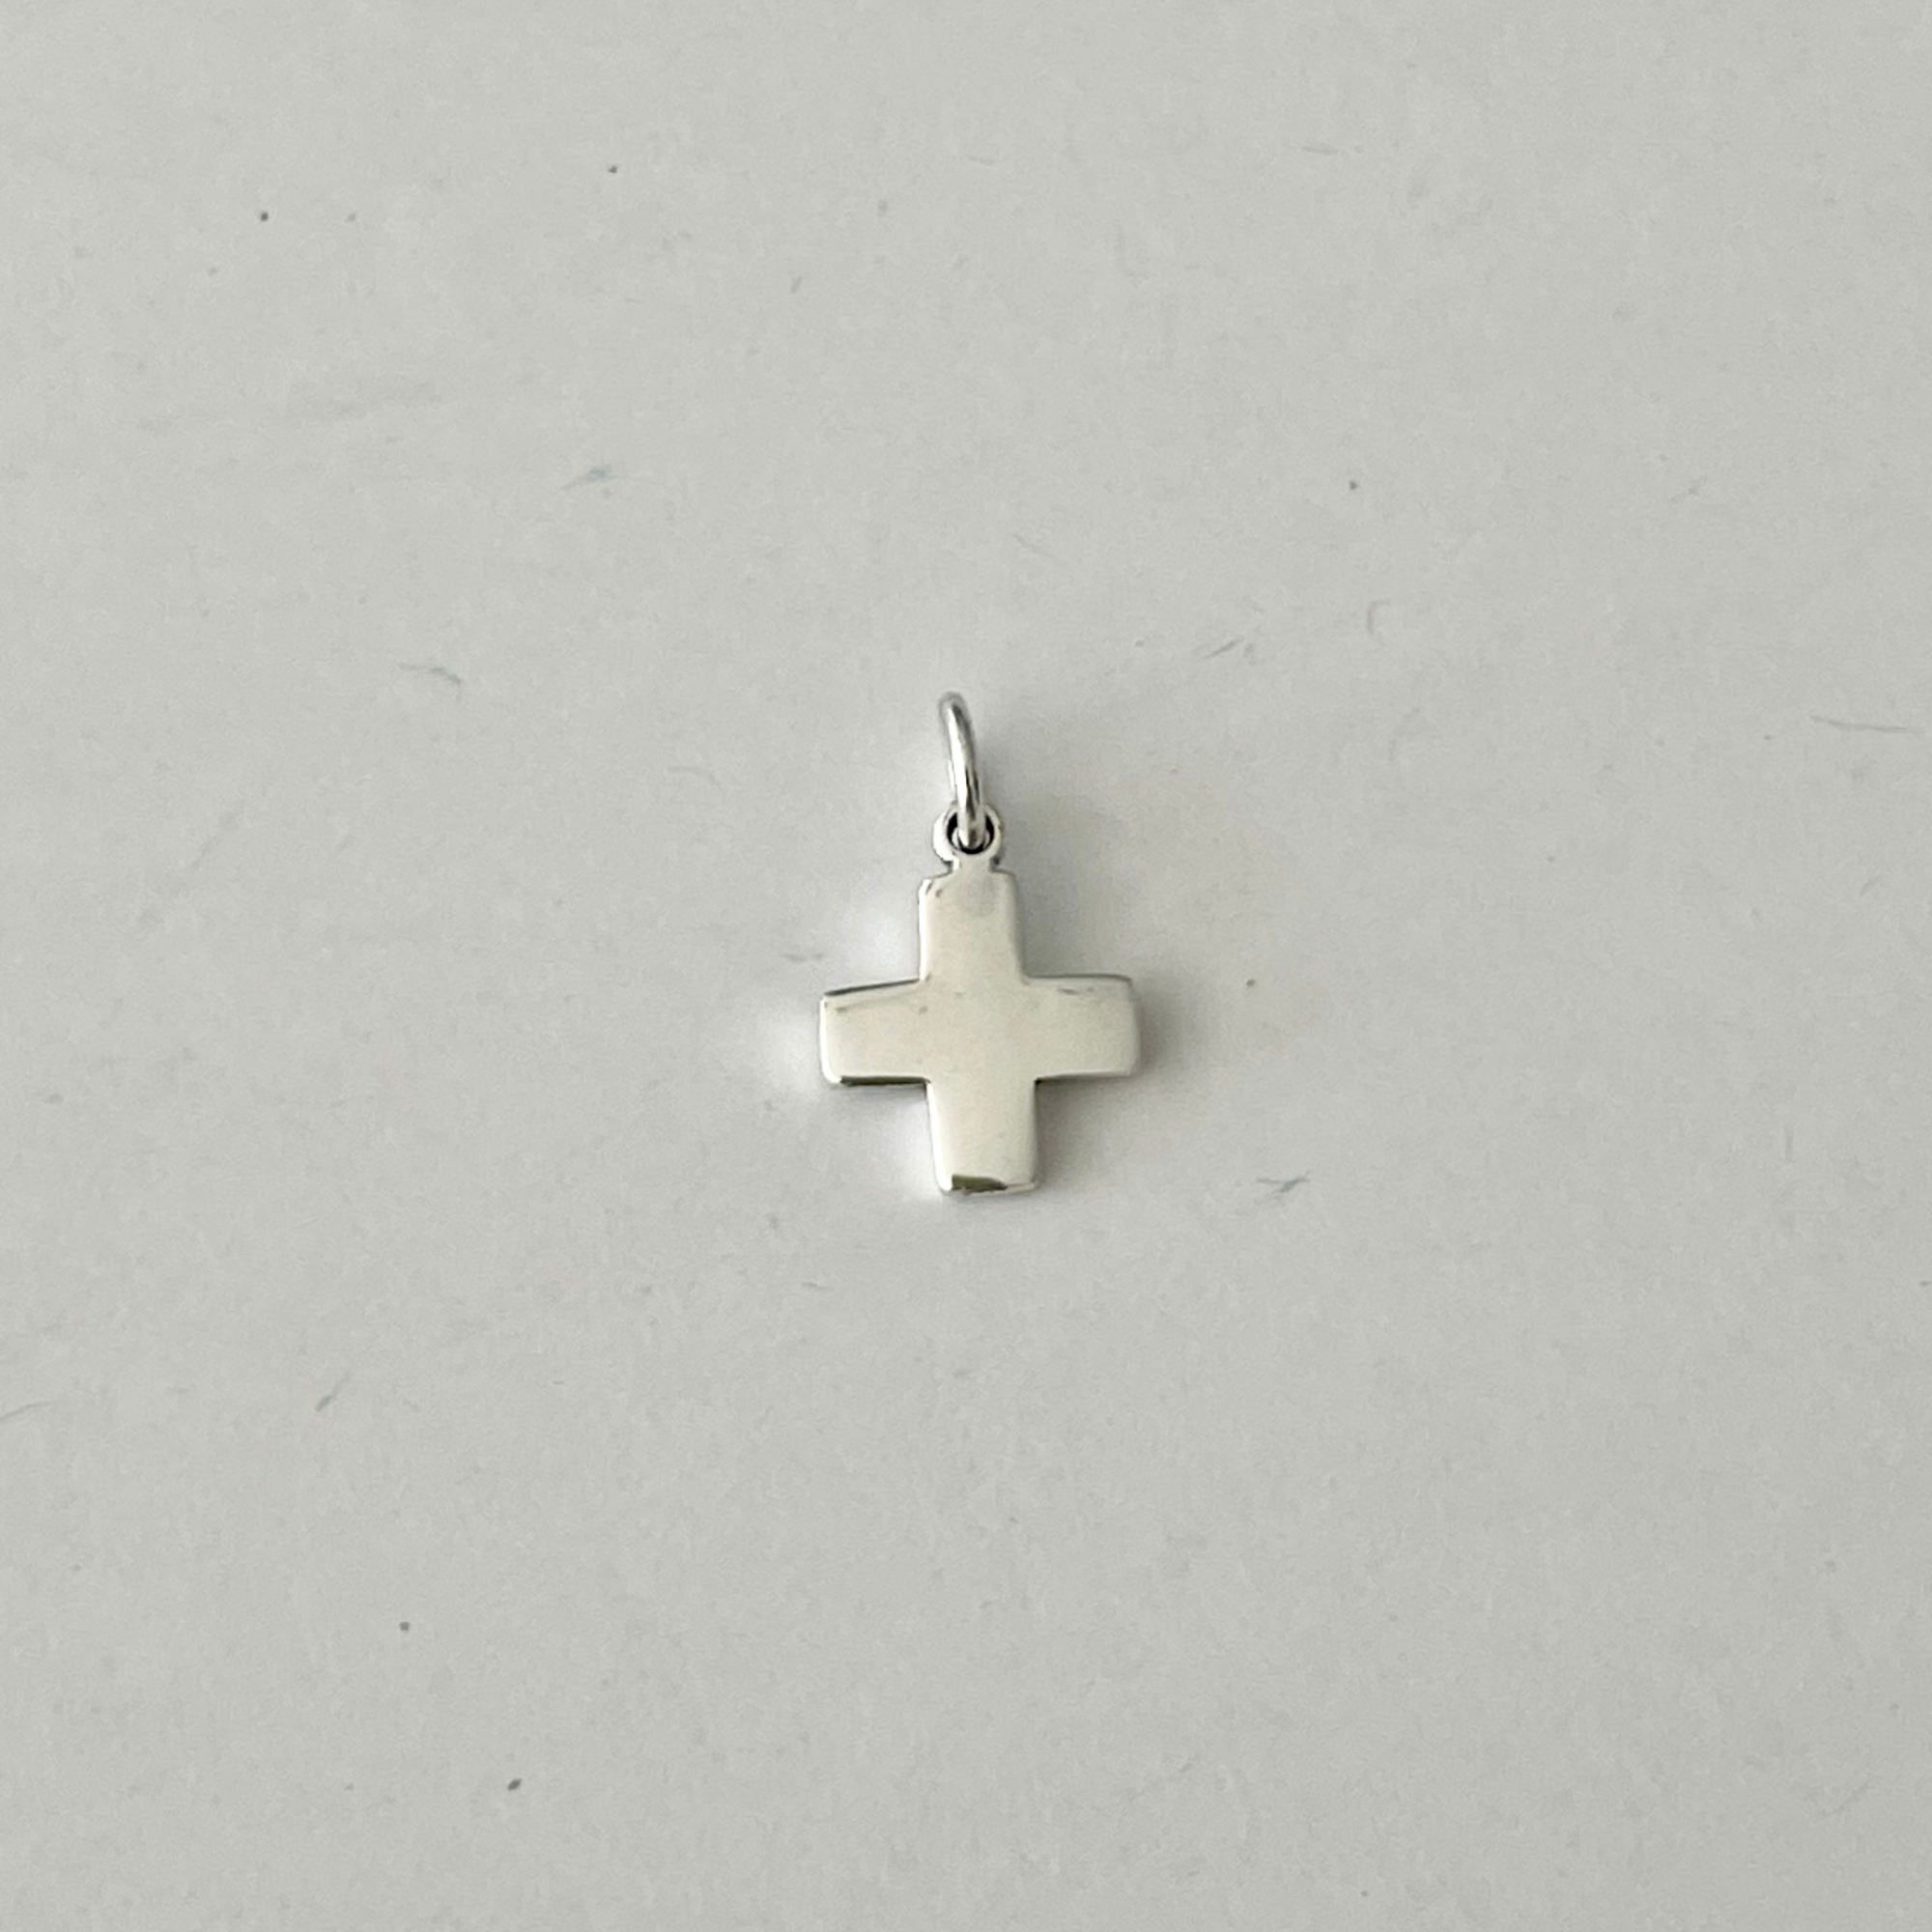 Perfect .925 solid sterling silver Small Cross Charm. Charming on a necklace or bracelet; add it to a charm ring to customize your look; coordinate it with other charms to reflect your personal style and story.